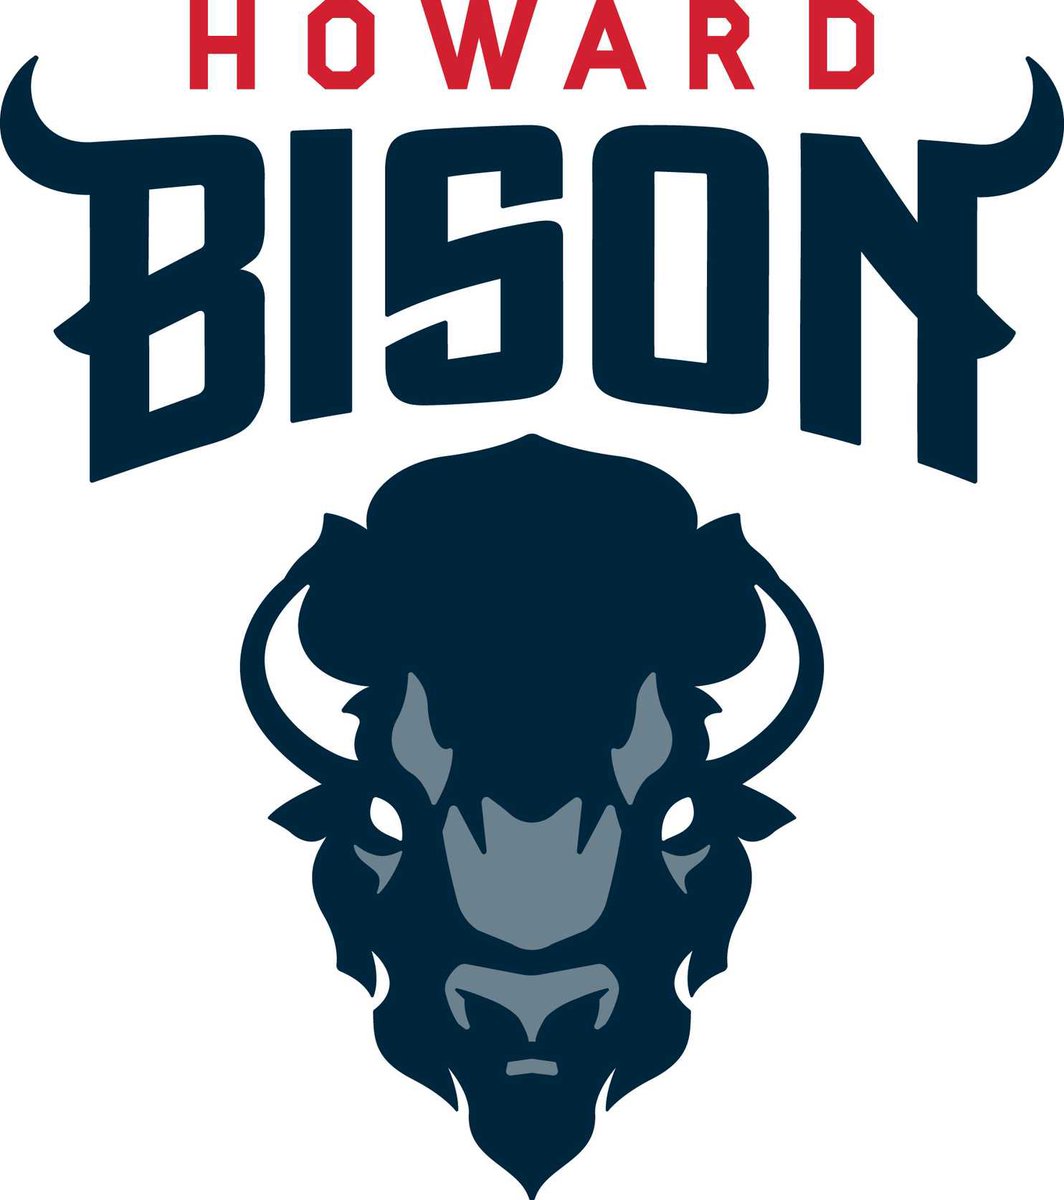 🔥After a great conversation with @coachB48 I am excited to announce that I have received my 9th D1🅾️ffer and 1st HBCU offer! @HUBISONFOOTBALL @CoachLScott70 @eastsidefbsc @eagles_eastside @EHSEaglesPower @coachwoolcock @mossfitness @treyatcitizen @247Sports @On3Recruits…